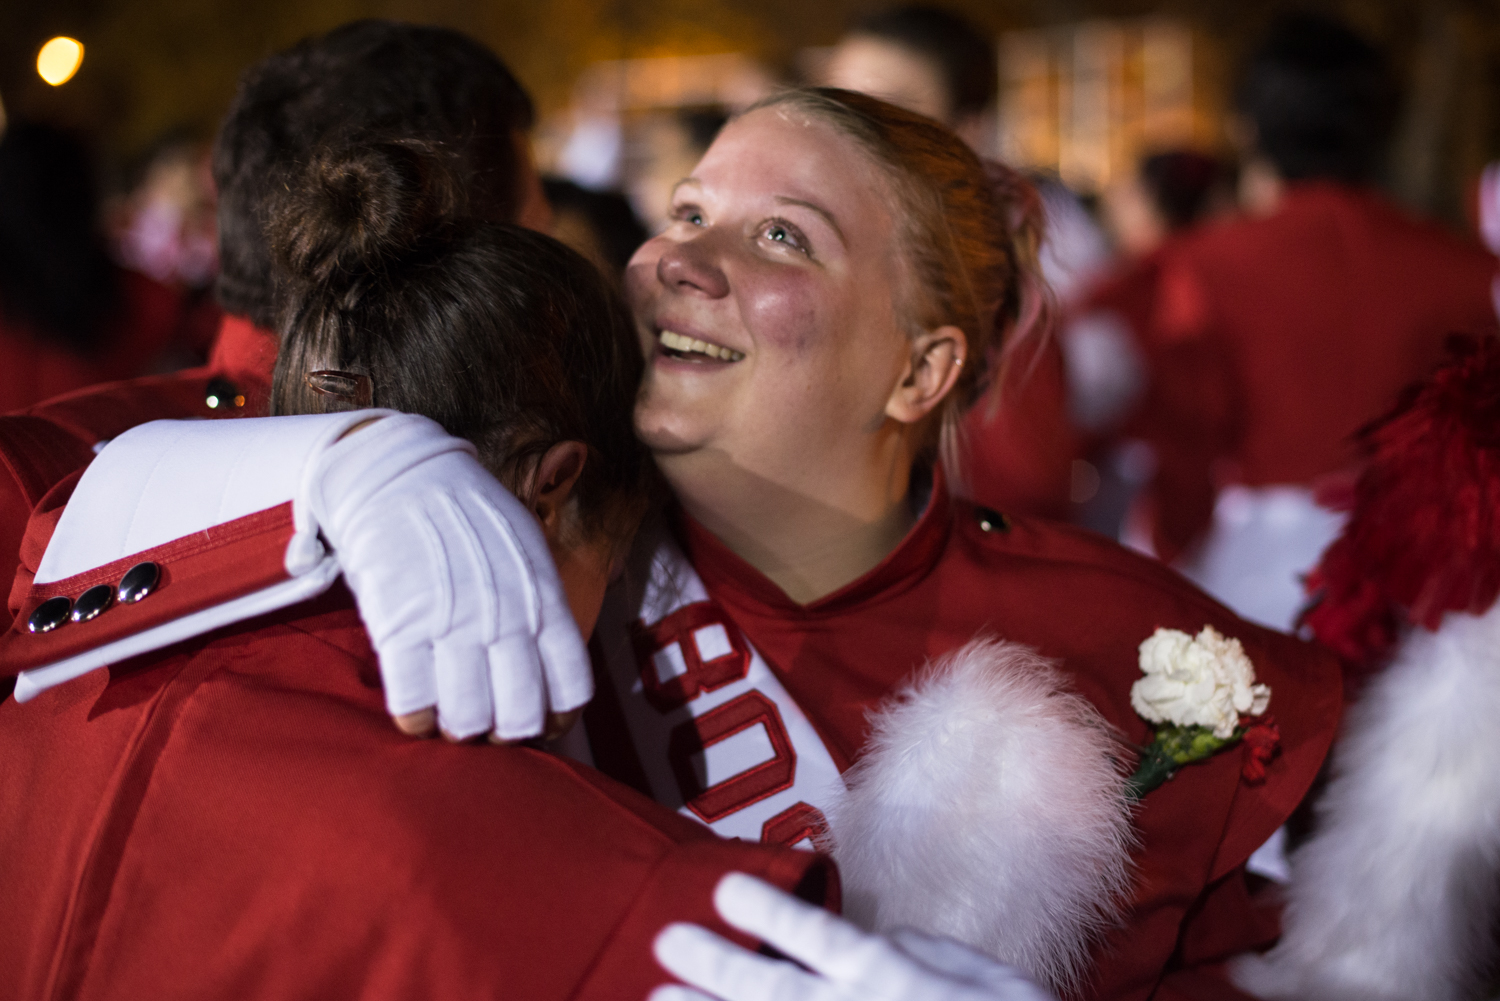 Taylor Kenyon (right) hugs a friend among fellow BU band members gathering following her last performance as a college marching band member.